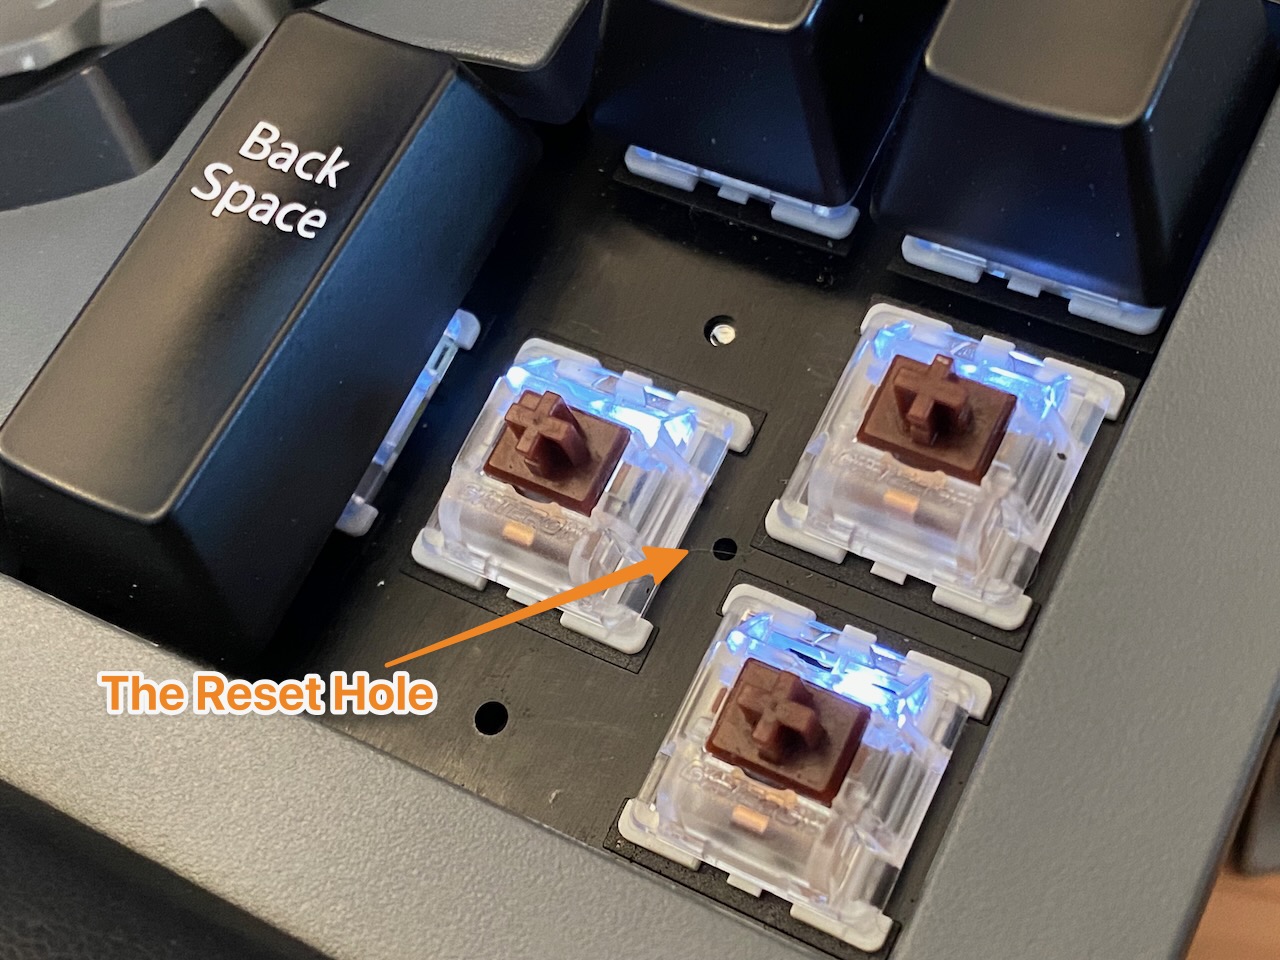 an annotated image of keys removed with an arrow pointing to the reset hole